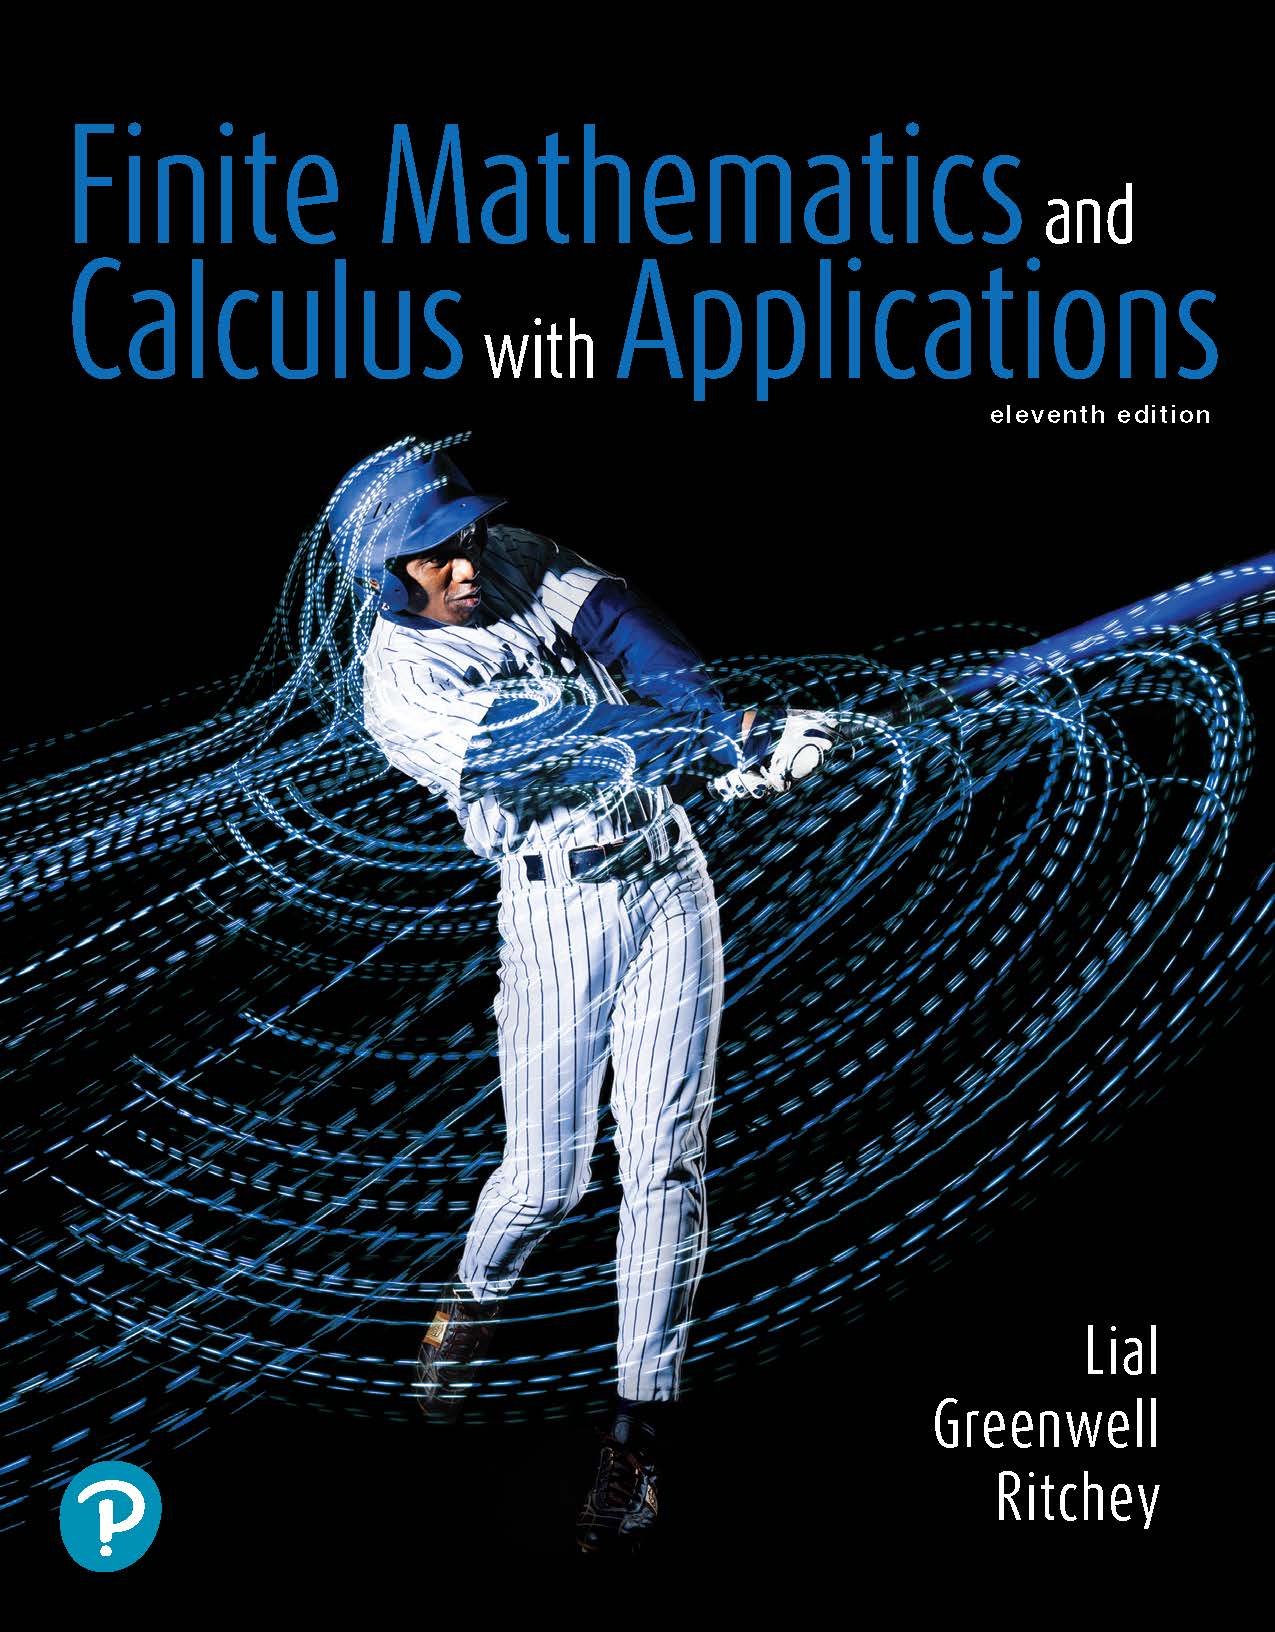 Front cover of Finite Mathematics and Calculus with Applications, eleventh edition, with Pearson logo